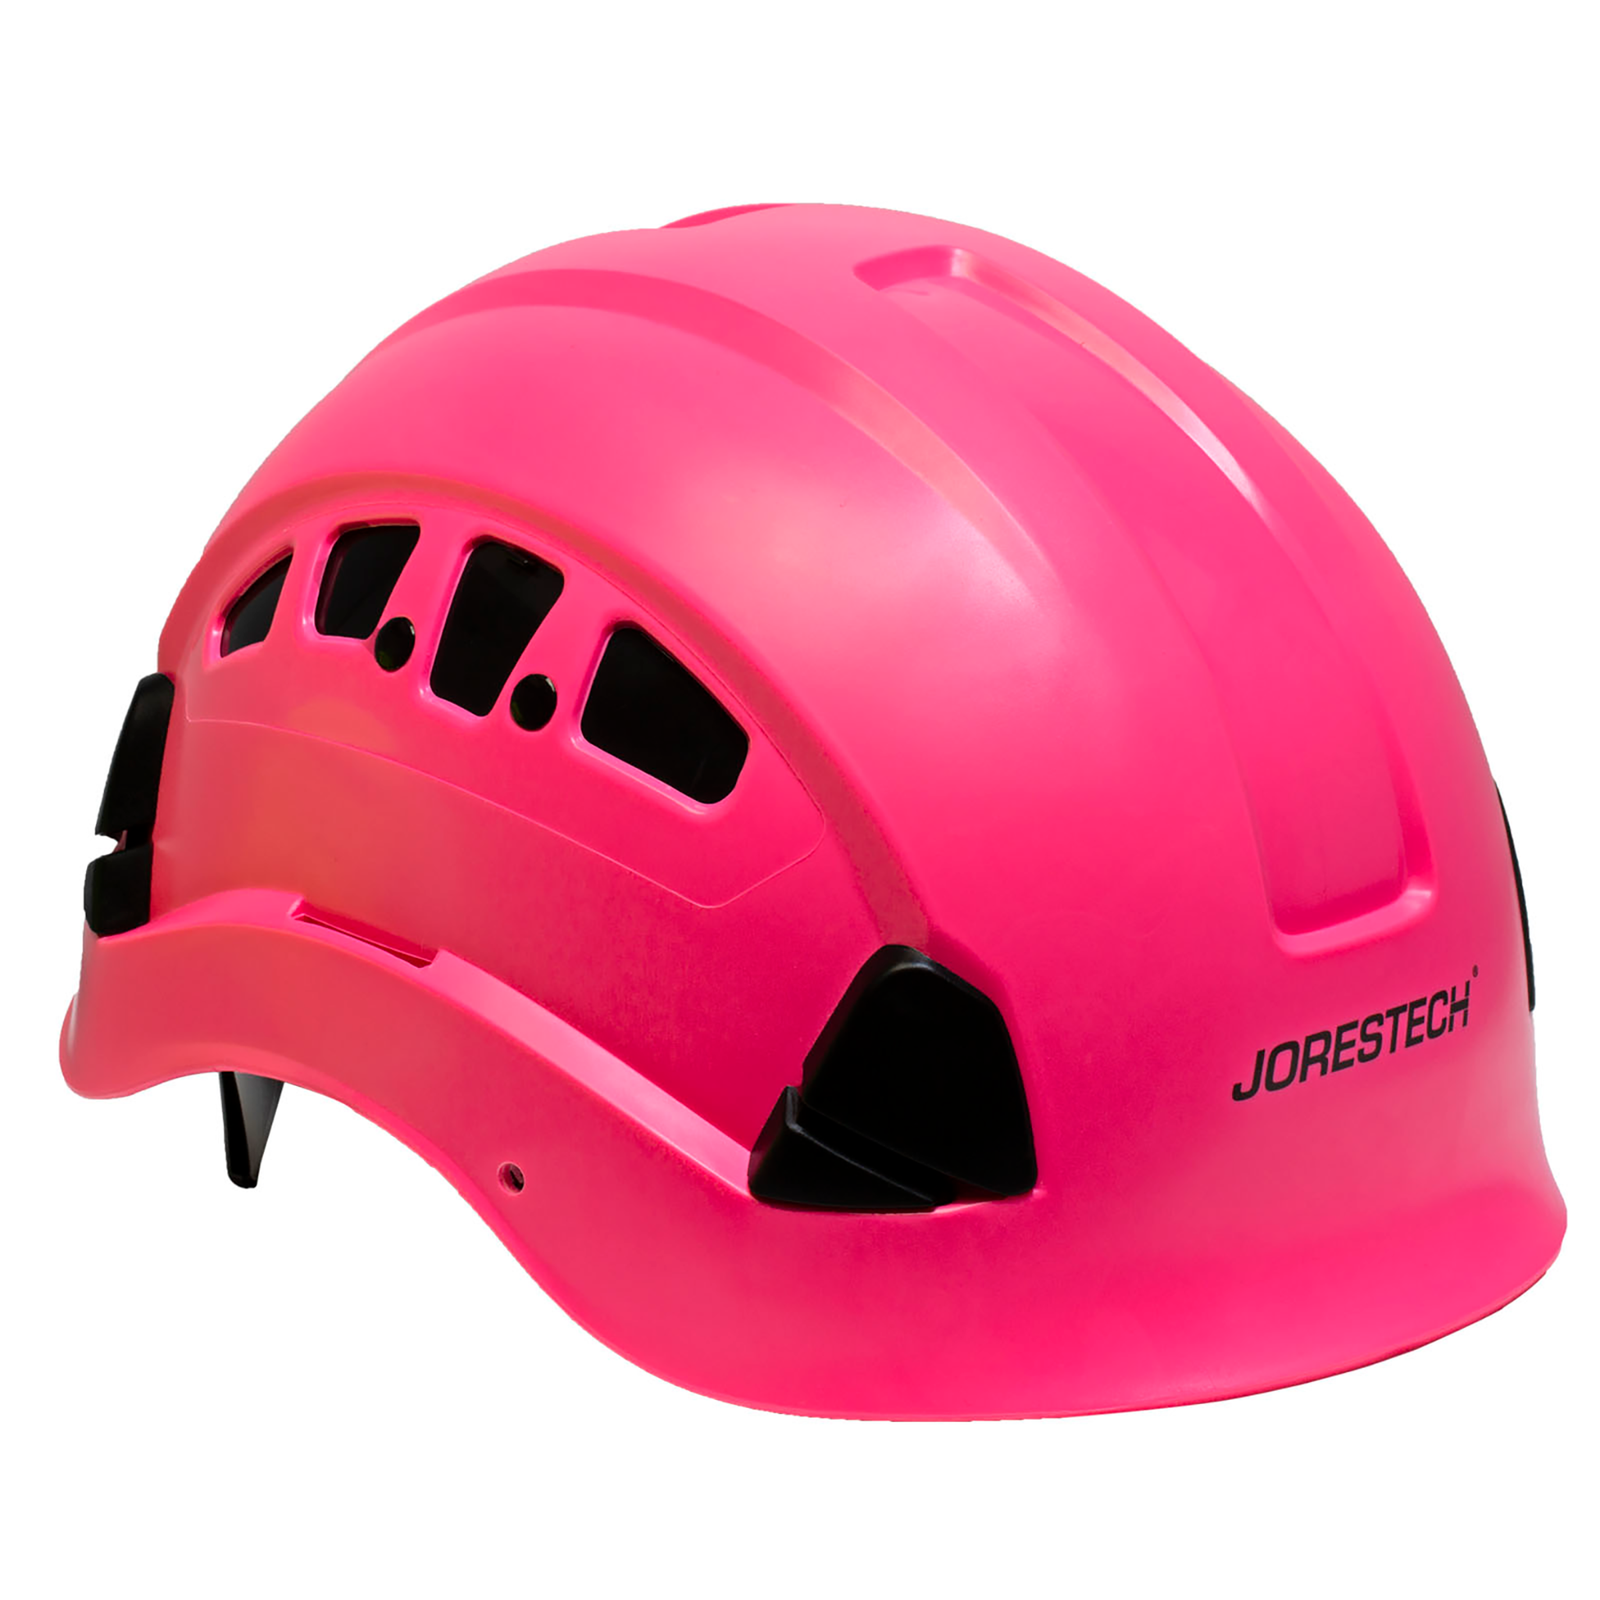 diagonal view of the Jorestech pink ventilated hard hat with adjustable 6 point suspension and chin strap